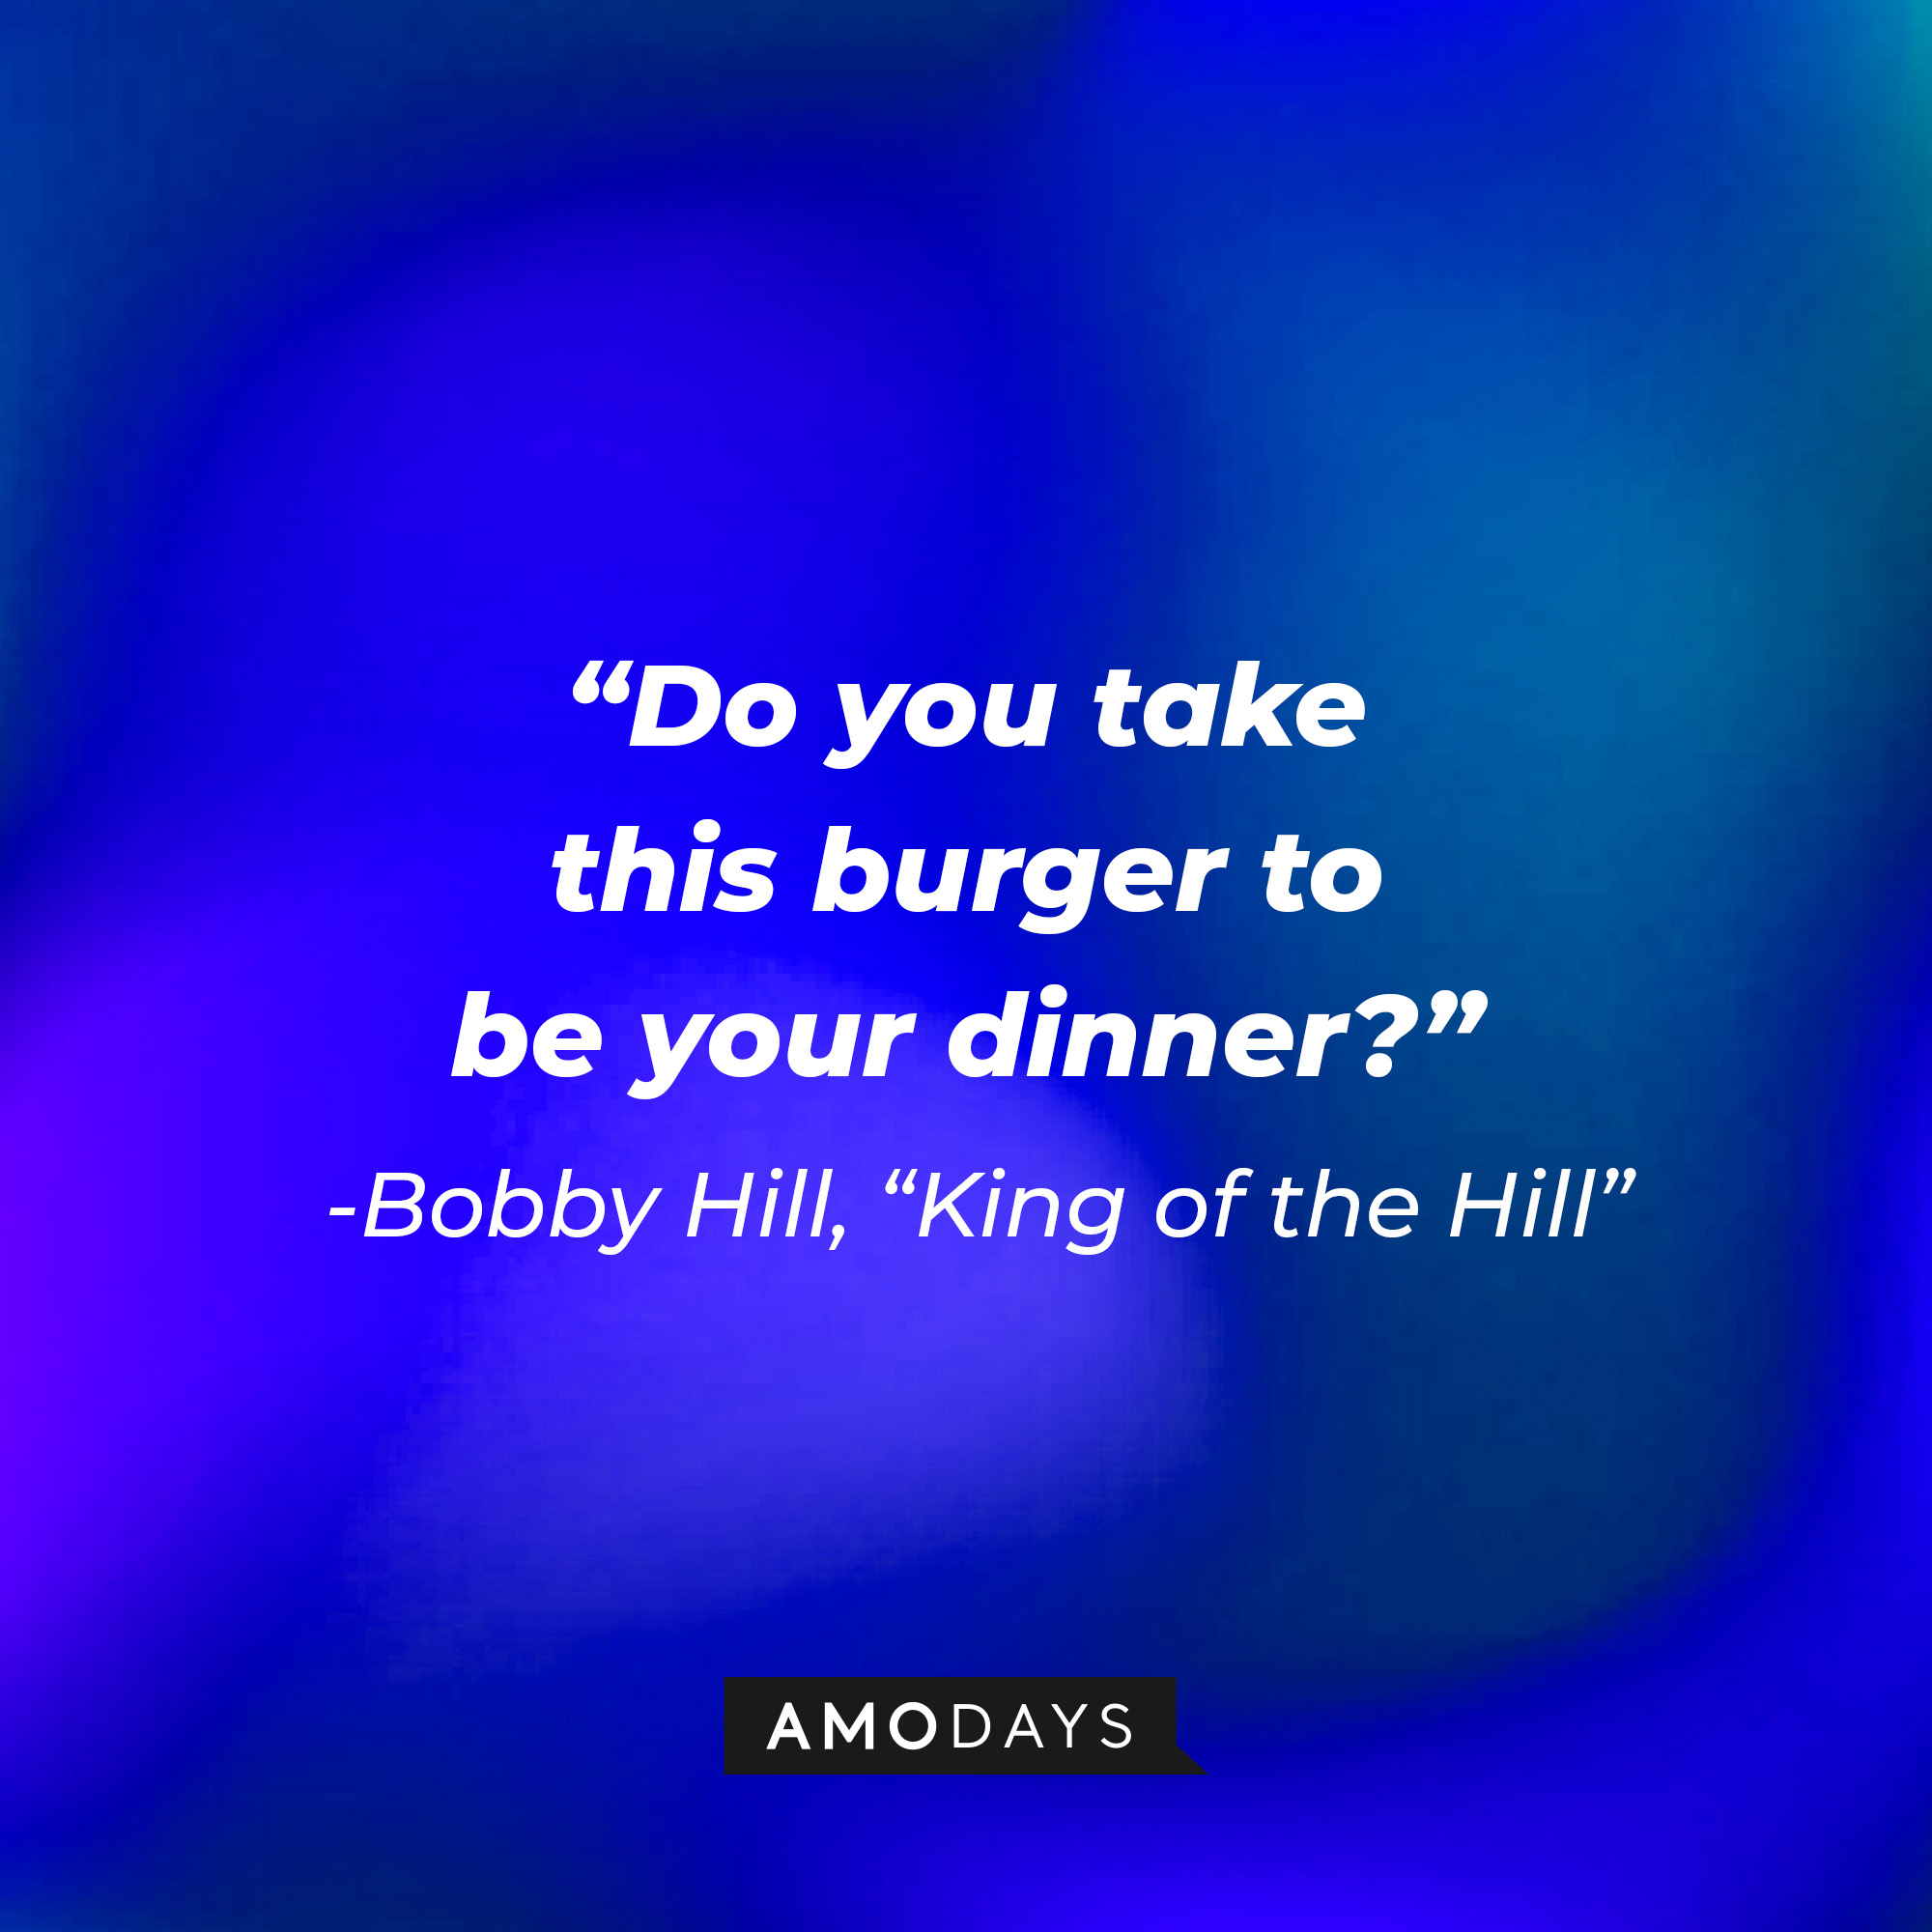 Bobby Hill with his quote, "Do you take this burger to be your dinner?" | Source: facebook.com/kingofthehillfan